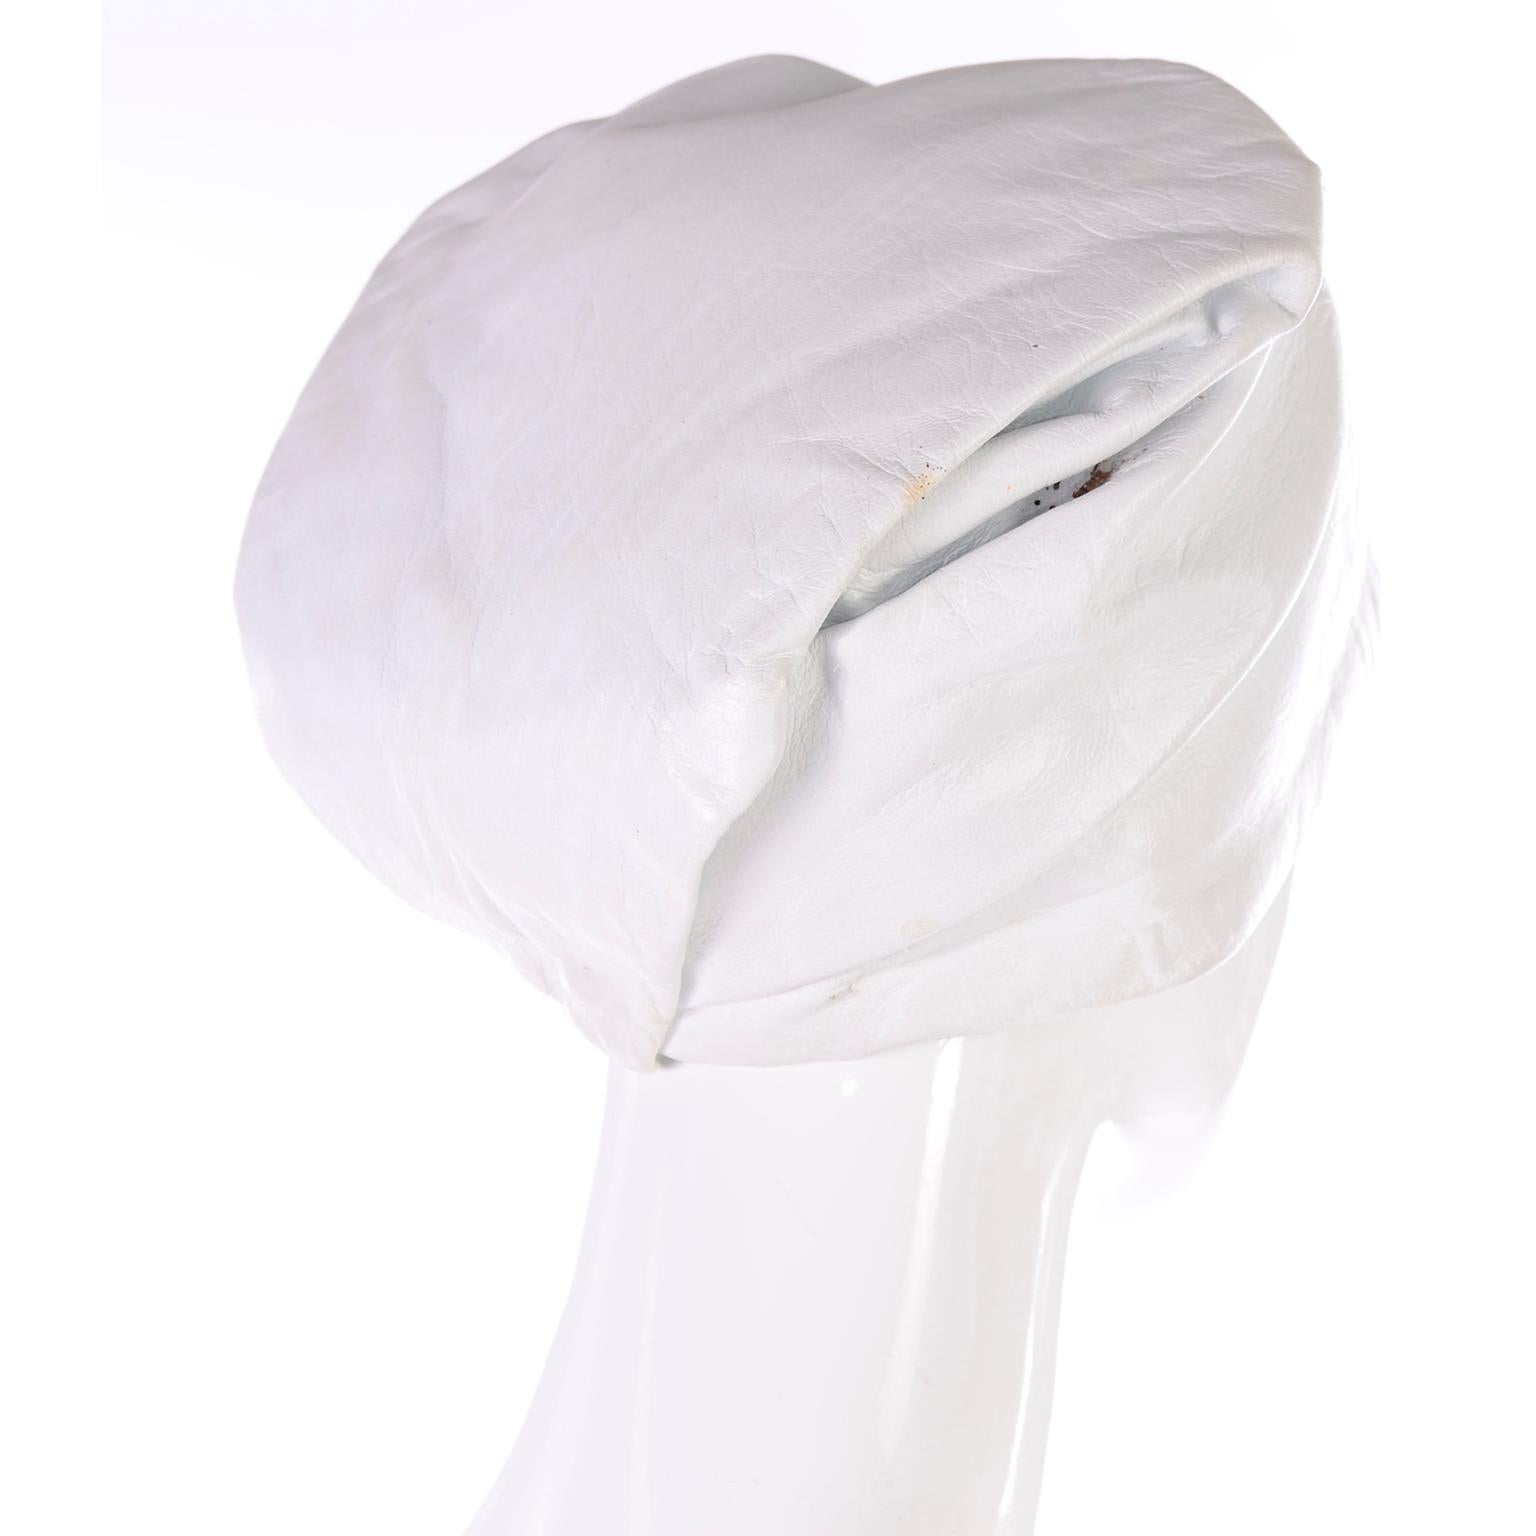 This is a very unique vintage YSL white leather hat with a fixed fold over envelope point in the back that creates a folded turban or bandana style look. This hat is really spectacular - the folds created by the folded point make it look loose and